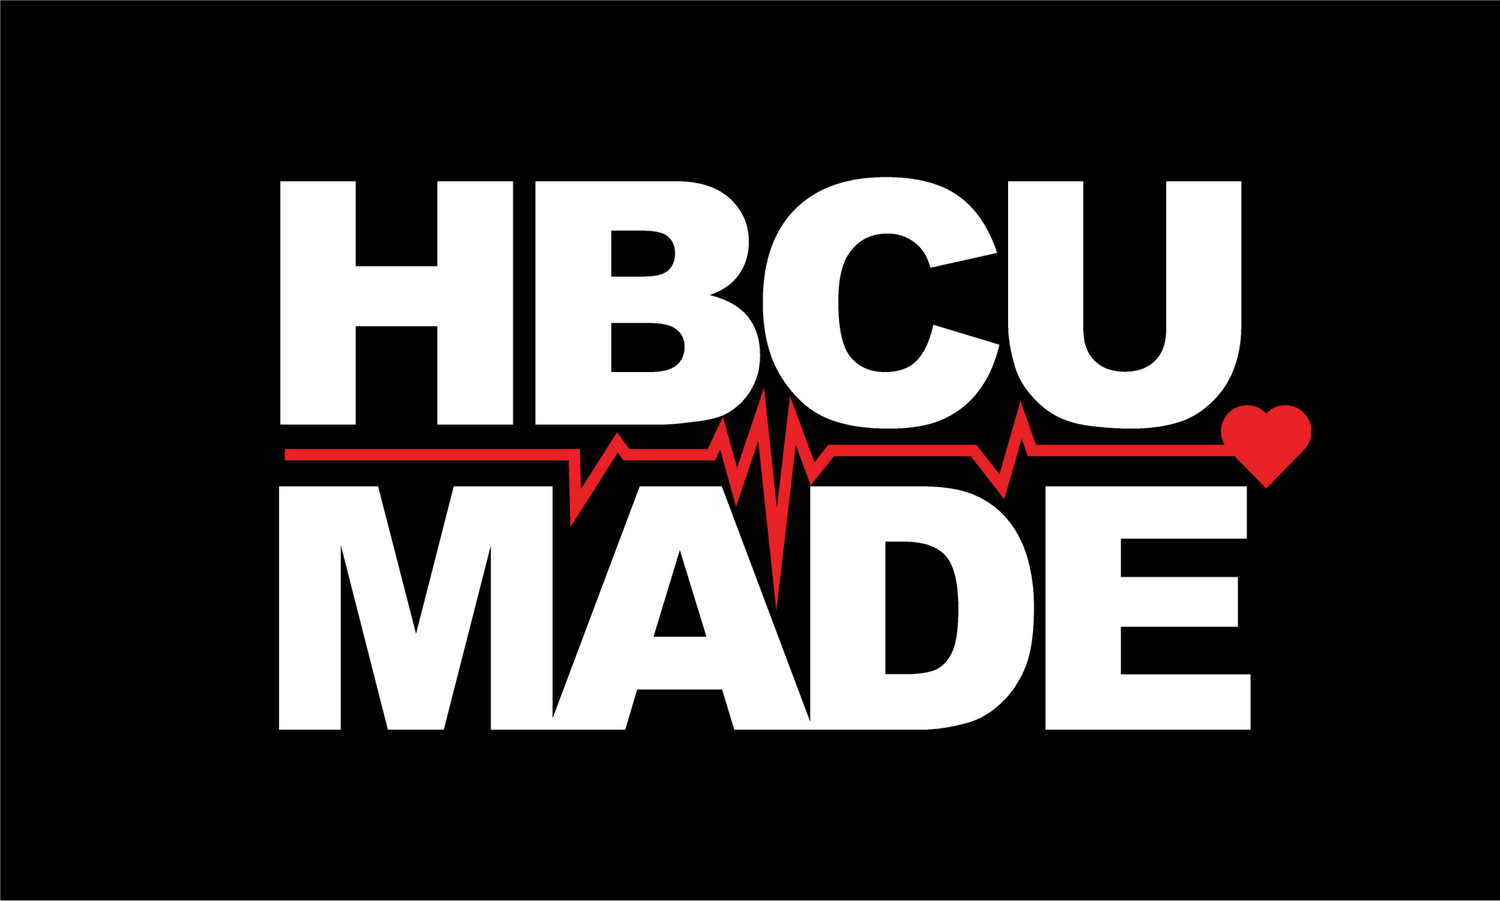 HBCU Made Logo - Black Background with Heartbeat/Pulse Symbol in Red